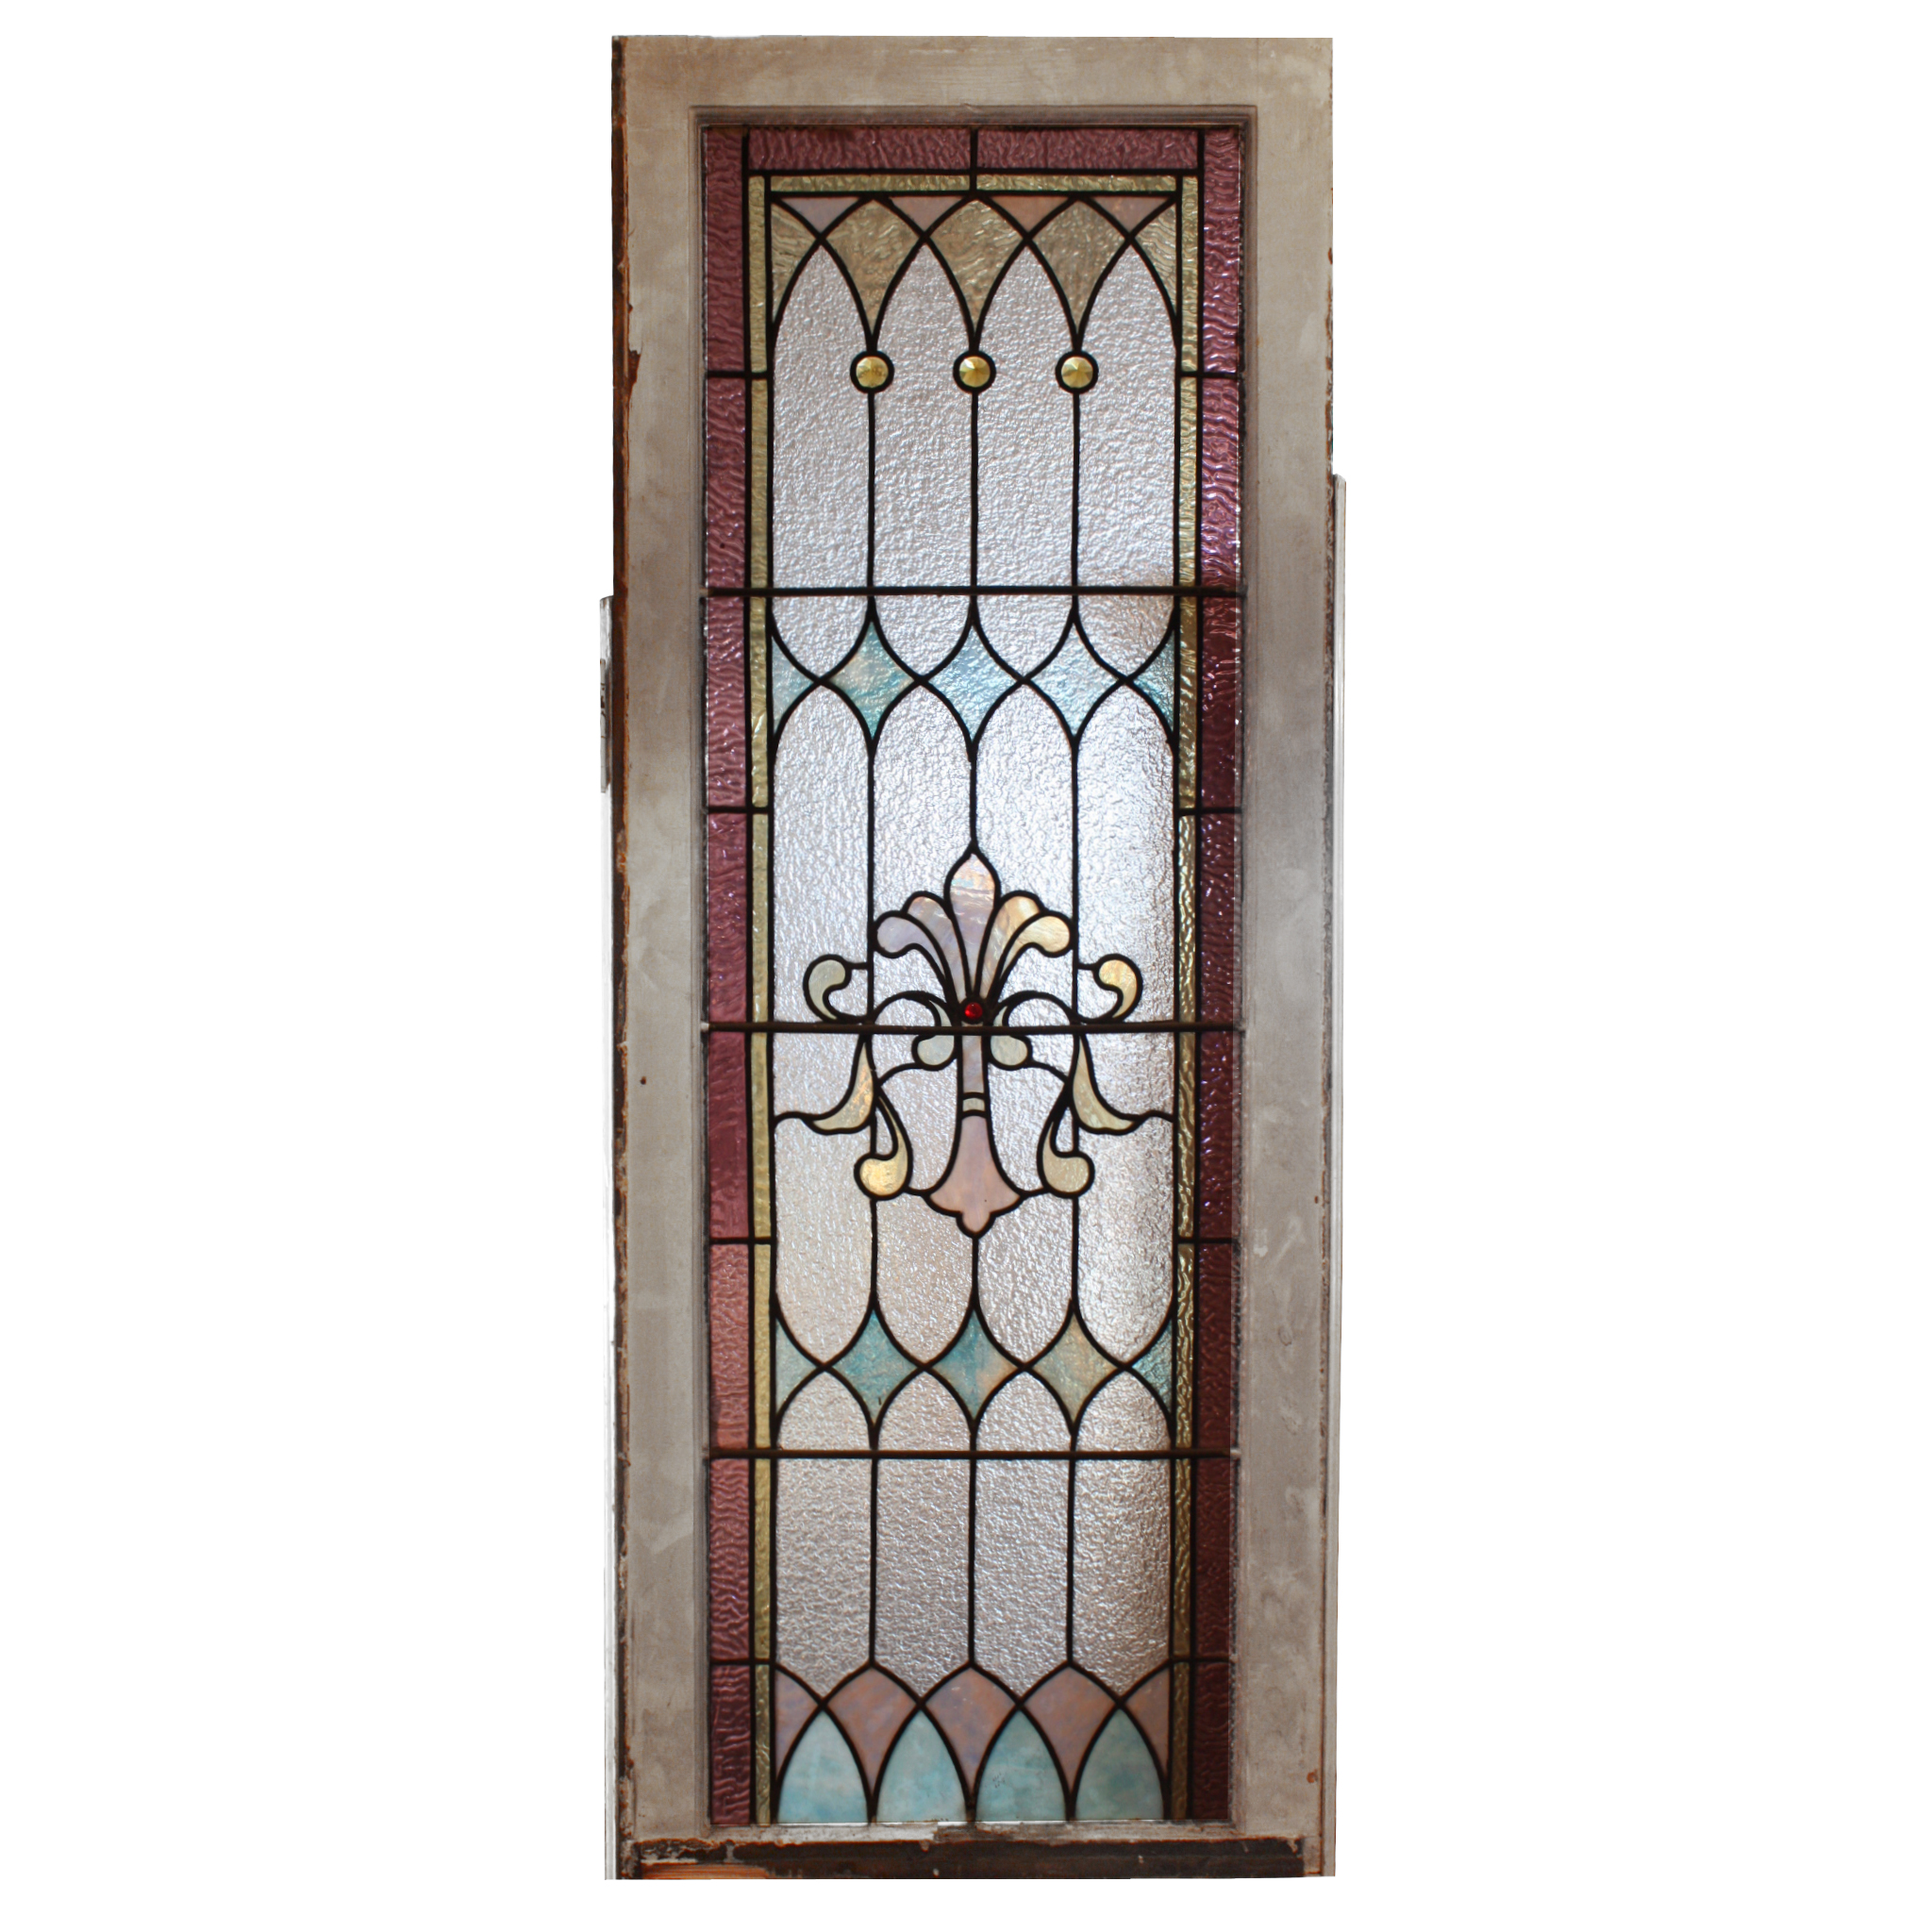 Magnificent Antique American Stained Glass Window With Jewels 19th